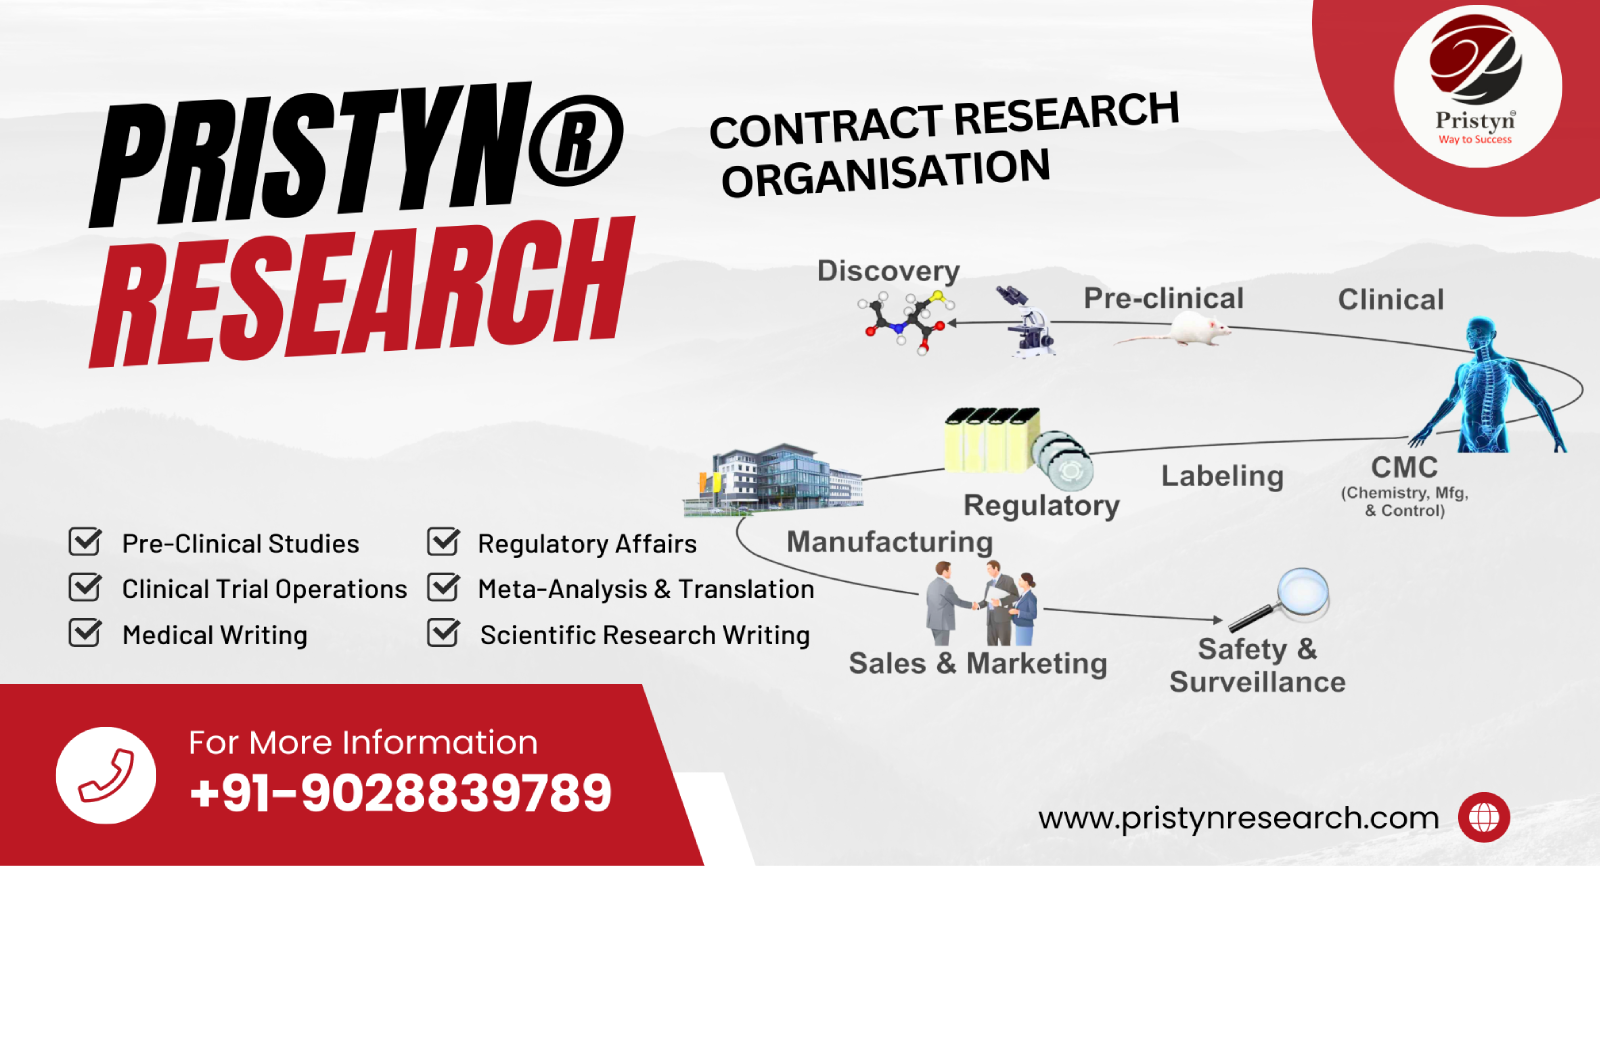 About Thesis writing services by Pristyn Research®